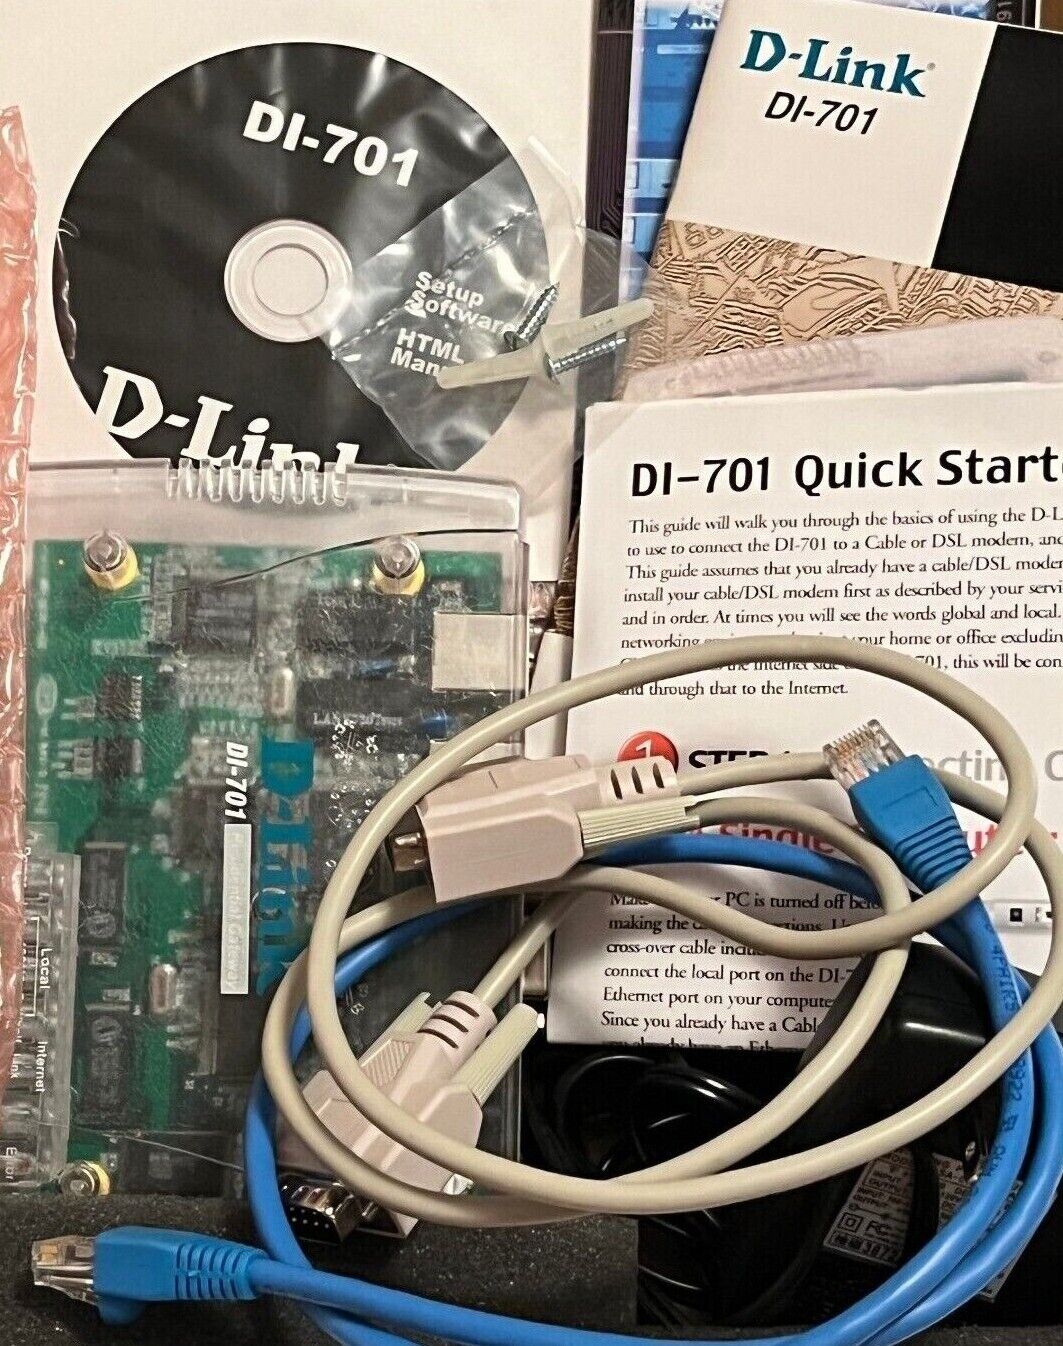 D-Link DI-701 Cable/DSL Internet Sharing Router: Has all components and docs